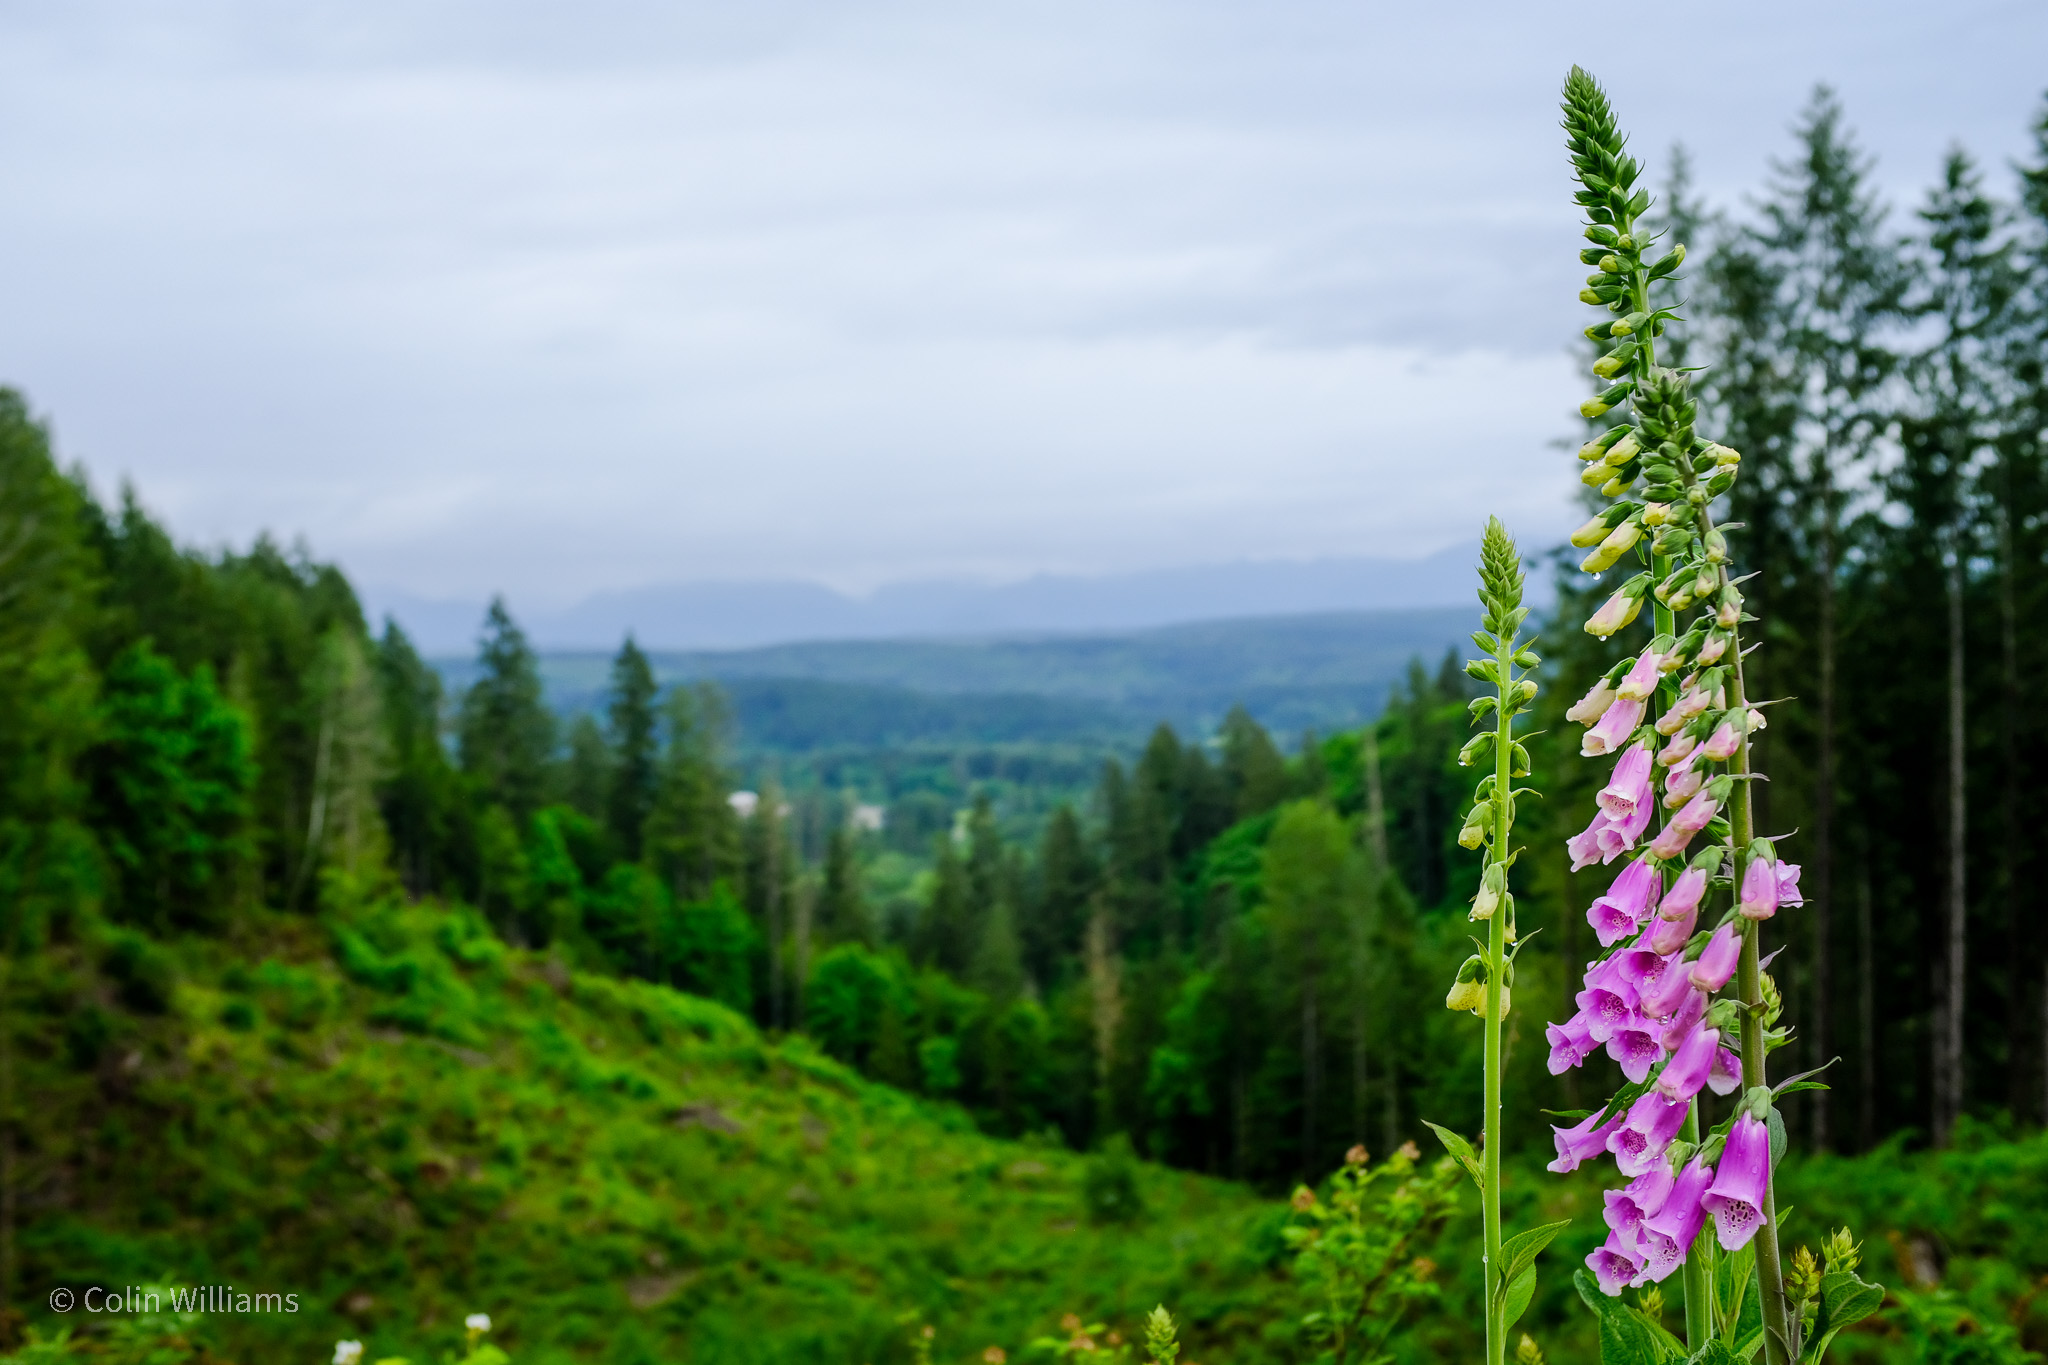 Green mountains in the background with a bright pink flower in the foreground.